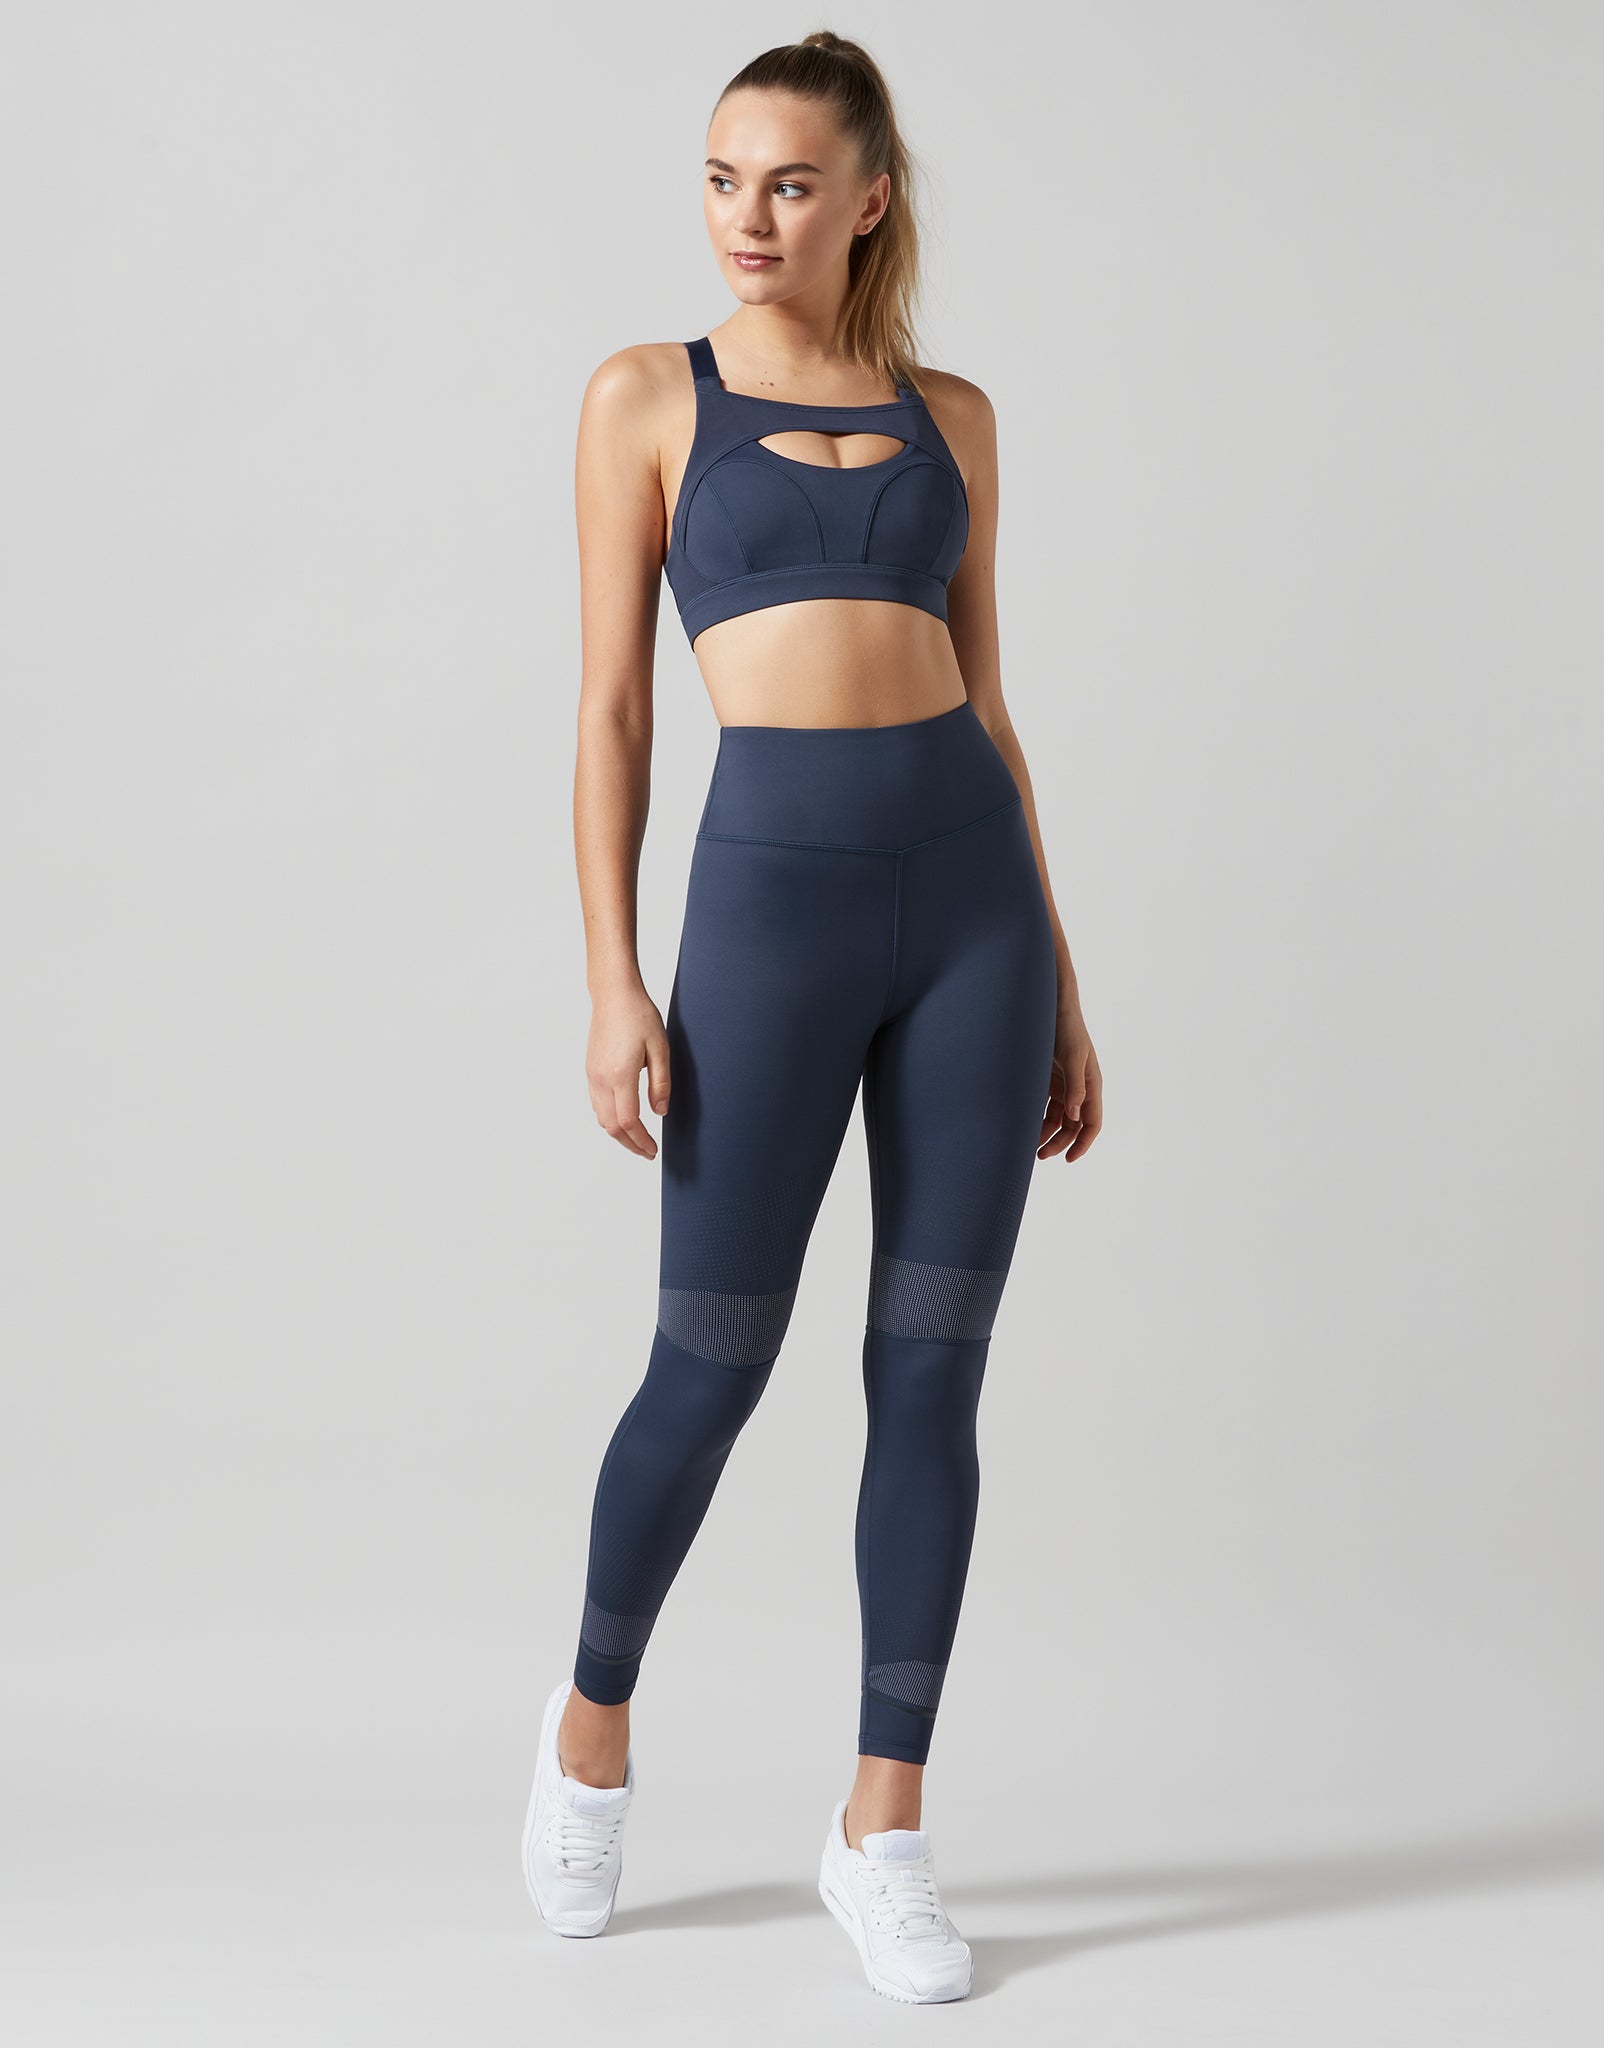 Athletic Leggings By Lilybod Size: L